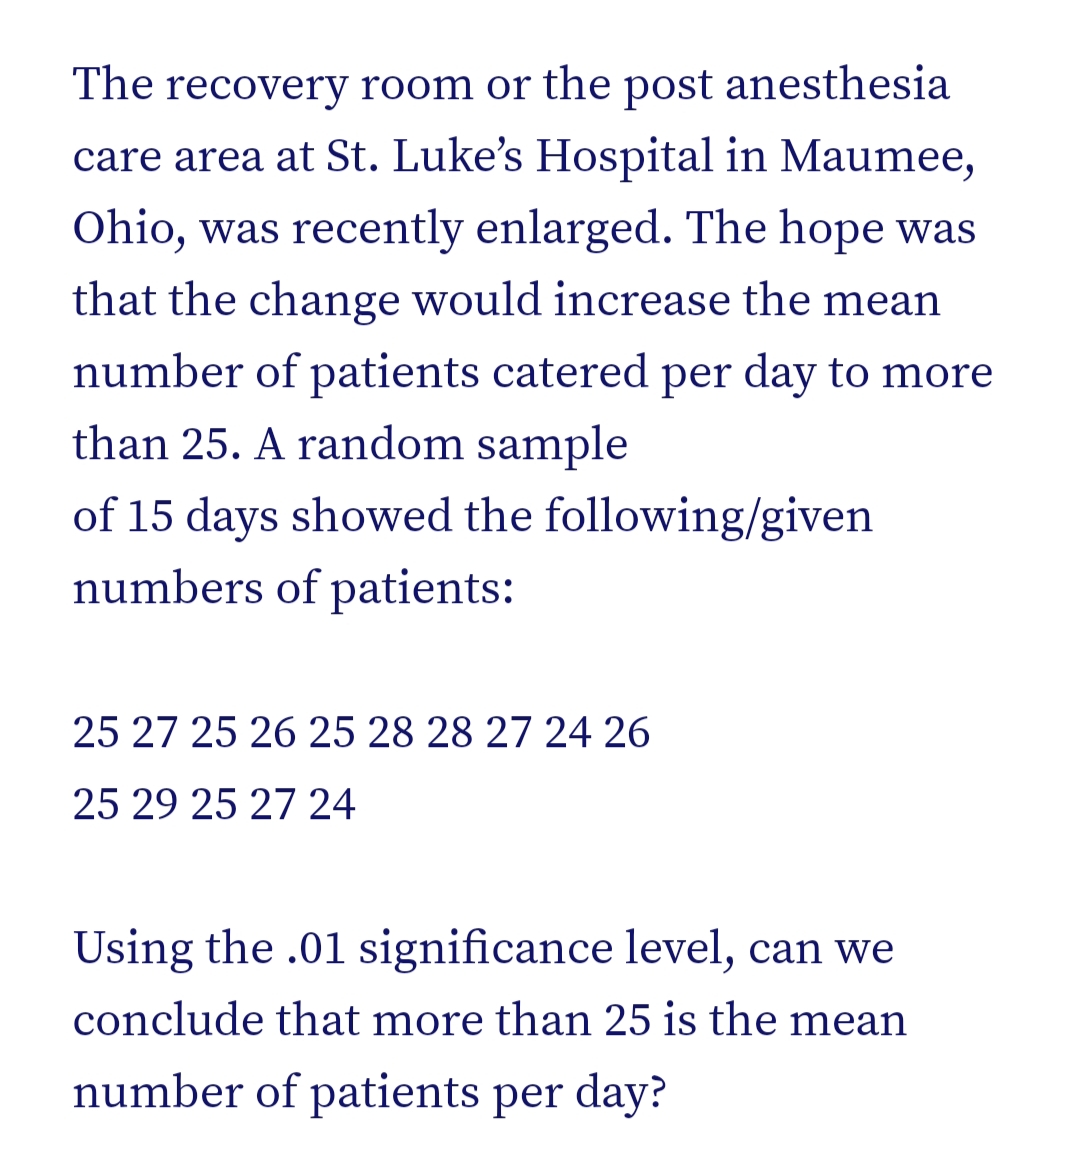 The recovery room or the post anesthesia
care area at St. Luke's Hospital in Maumee,
Ohio, was recently enlarged. The hope was
that the change would increase the mean
number of patients catered per day to more
than 25. A random sample
of 15 days showed the following/given
numbers of patients:
25 27 25 26 25 28 28 27 24 26
25 29 25 27 24
Using the .01 significance level, can we
conclude that more than 25 is the mean
number of patients per day?
